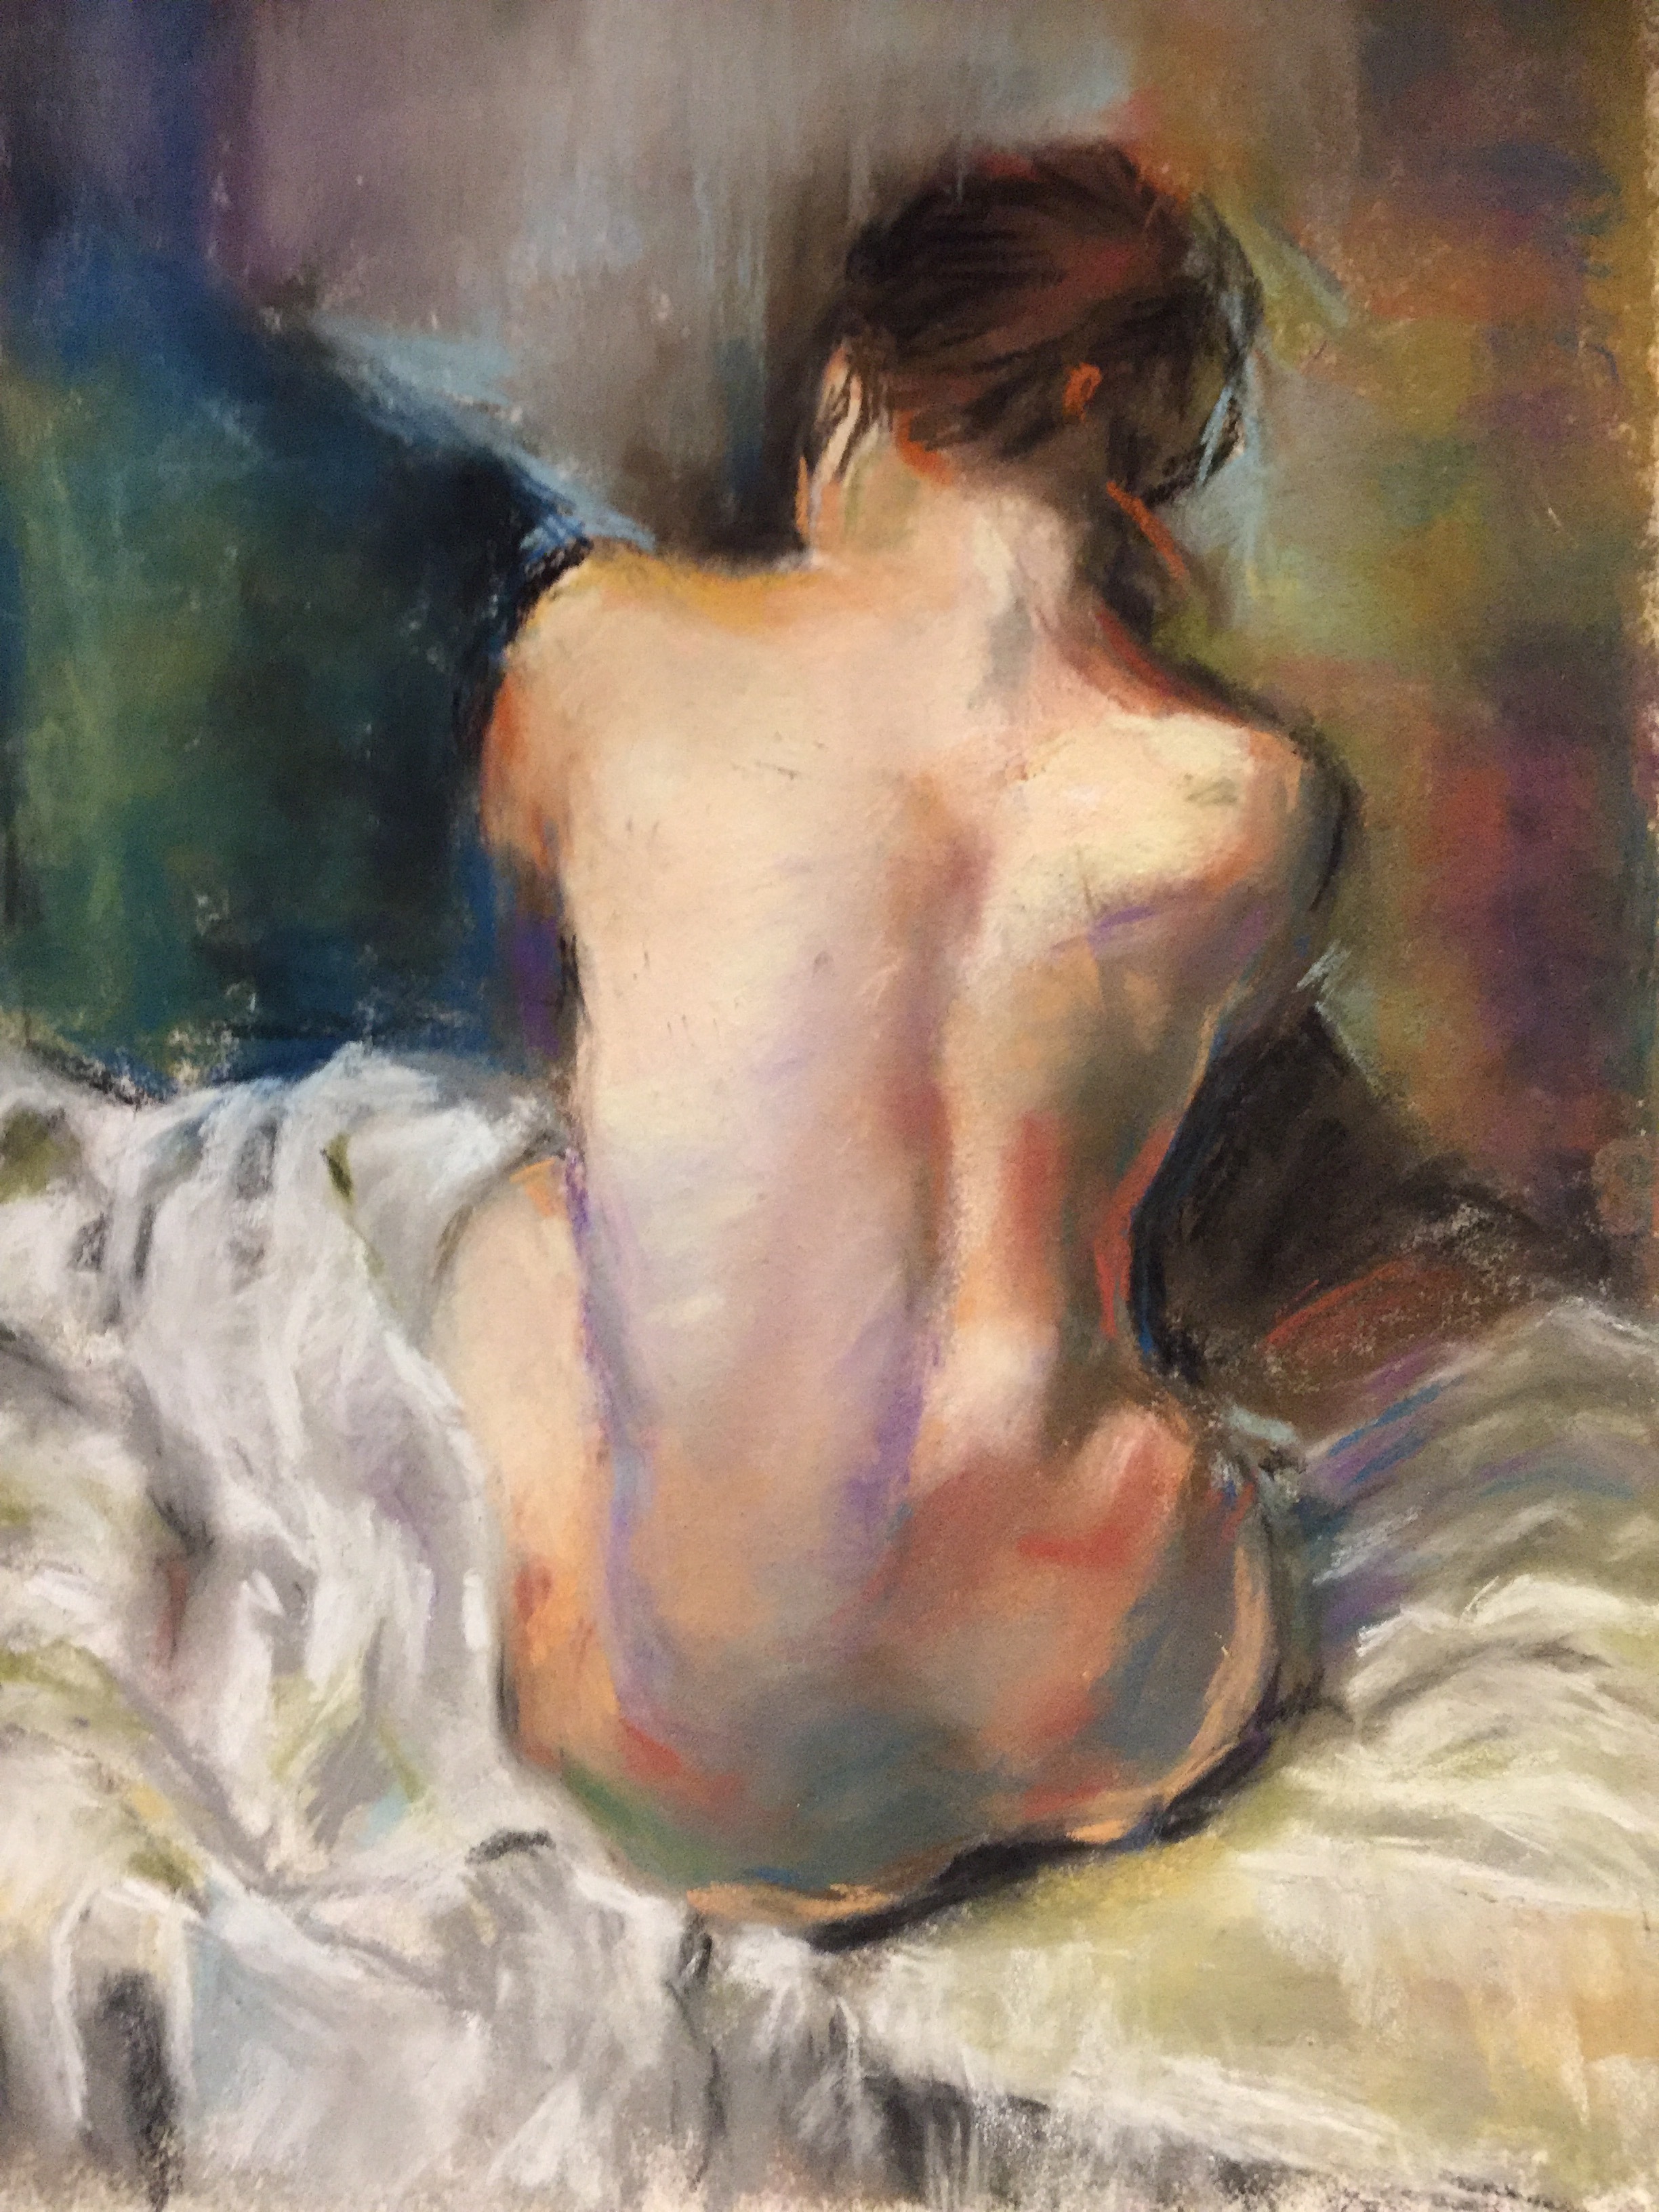 Nude study II, pastels on paper